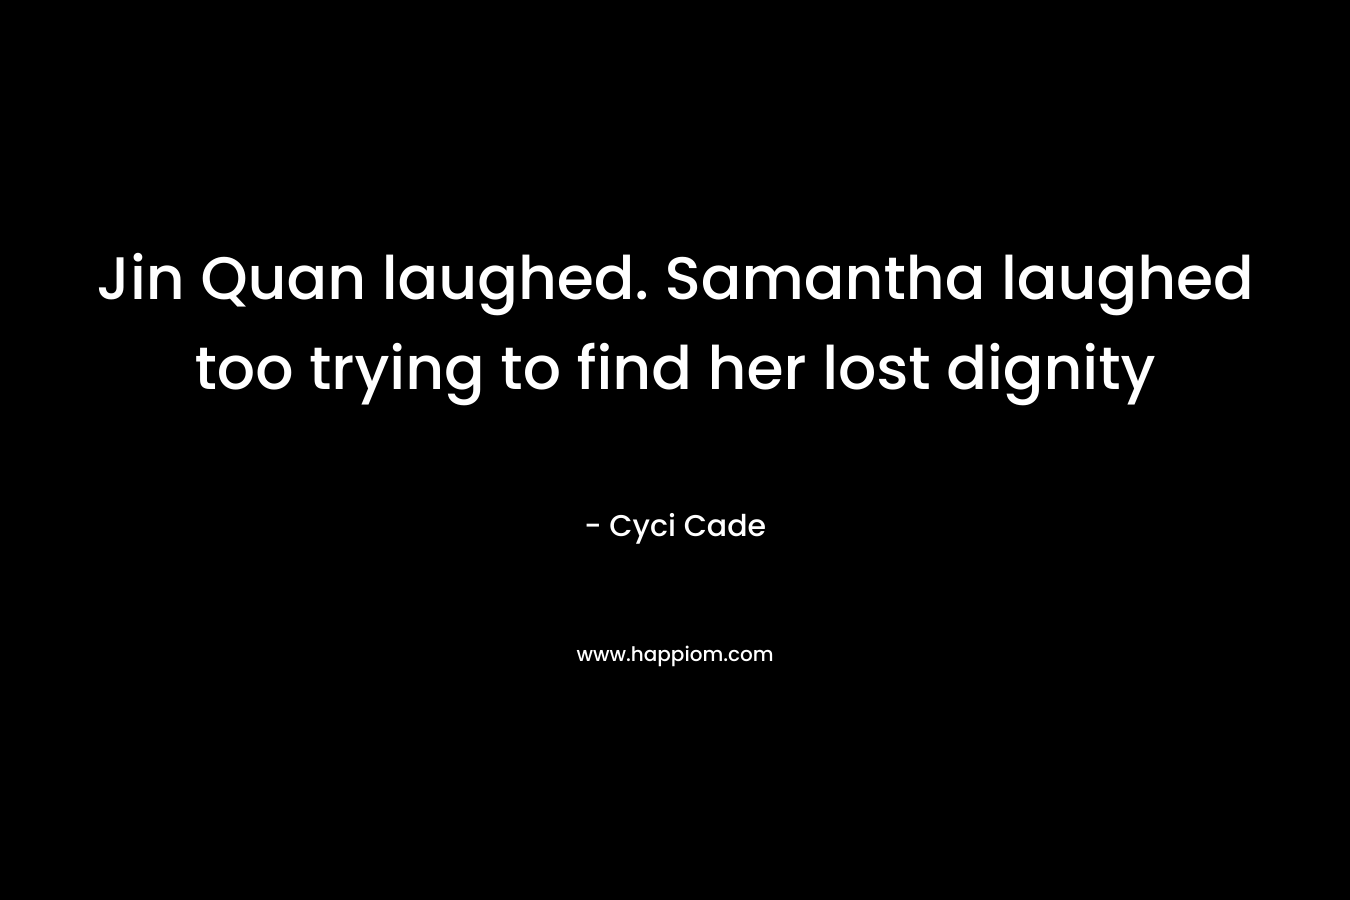 Jin Quan laughed. Samantha laughed too trying to find her lost dignity – Cyci Cade